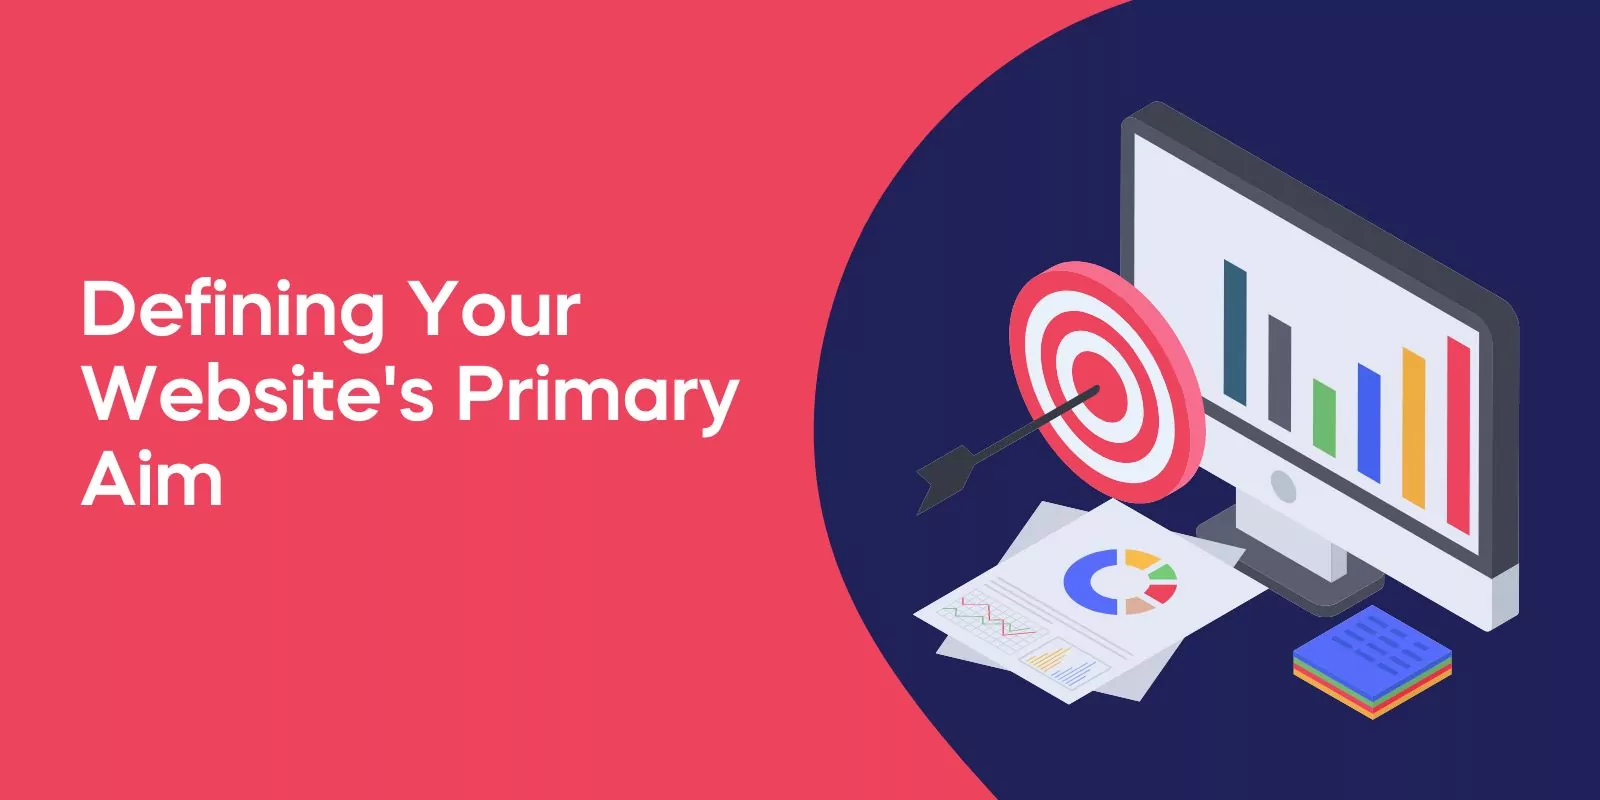 Defining Your Website's Primary Aim